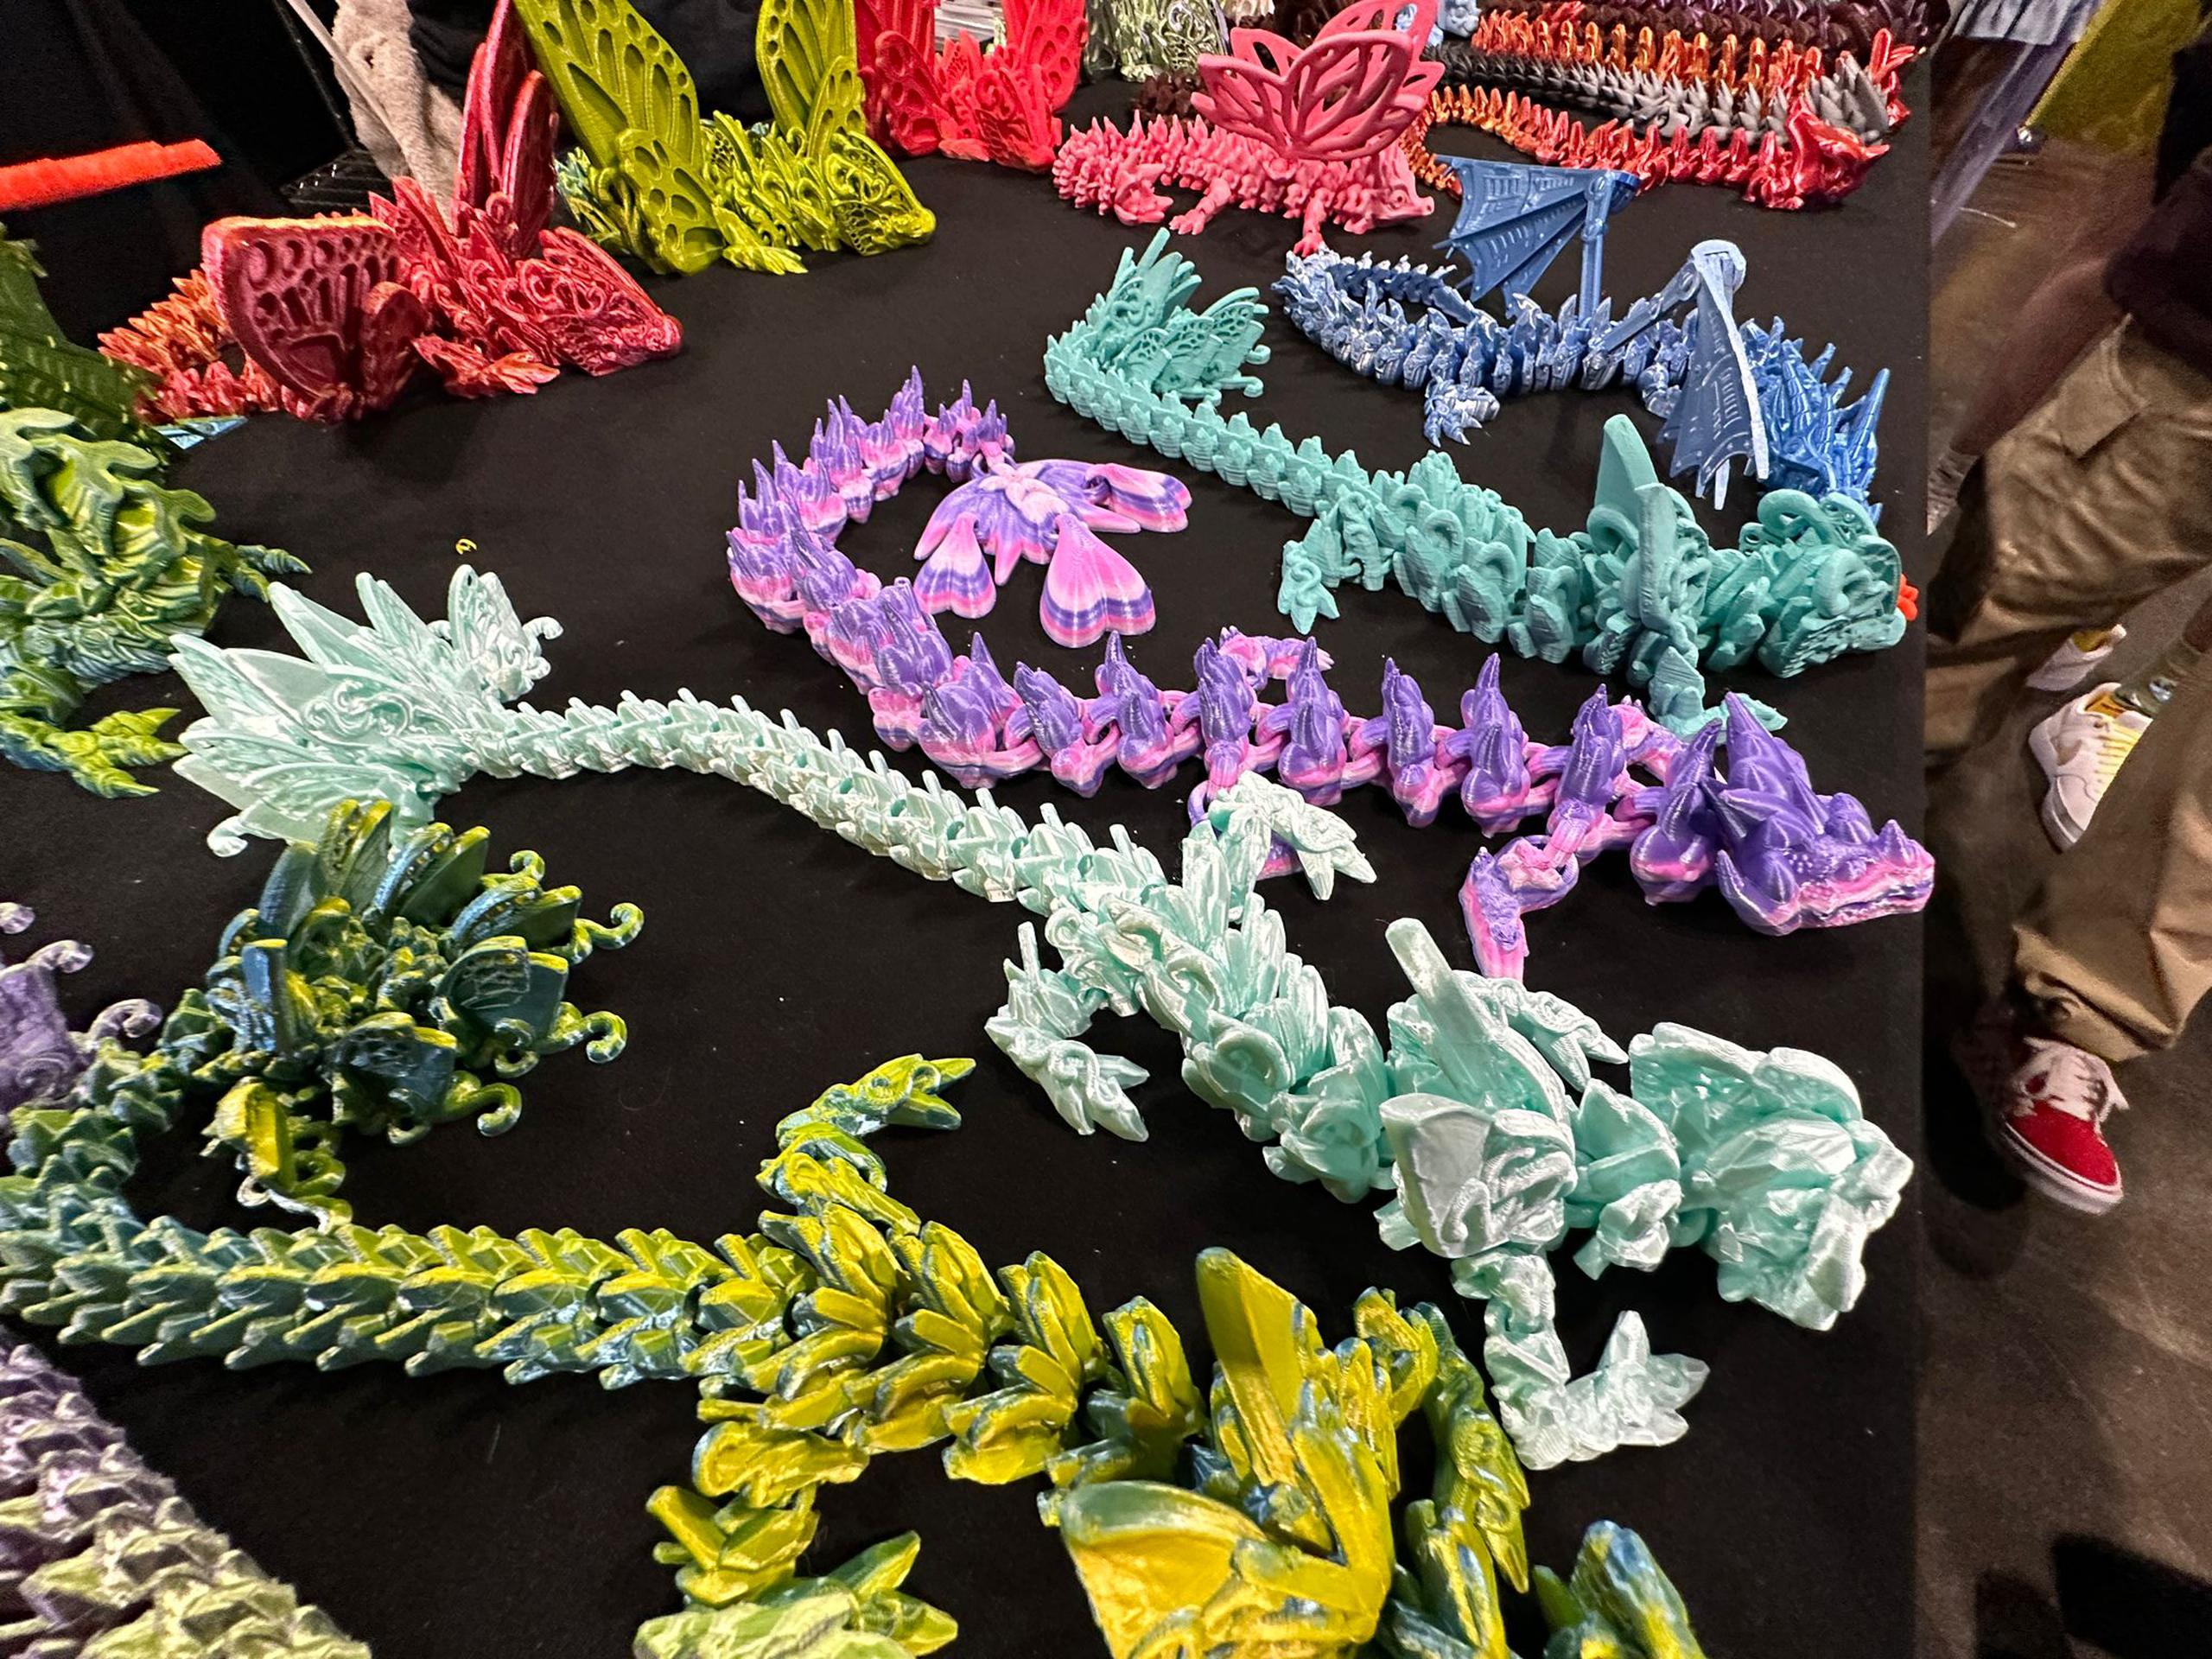 Carrillo showed off a collection of colorful dragons created using 3D printing at his station.